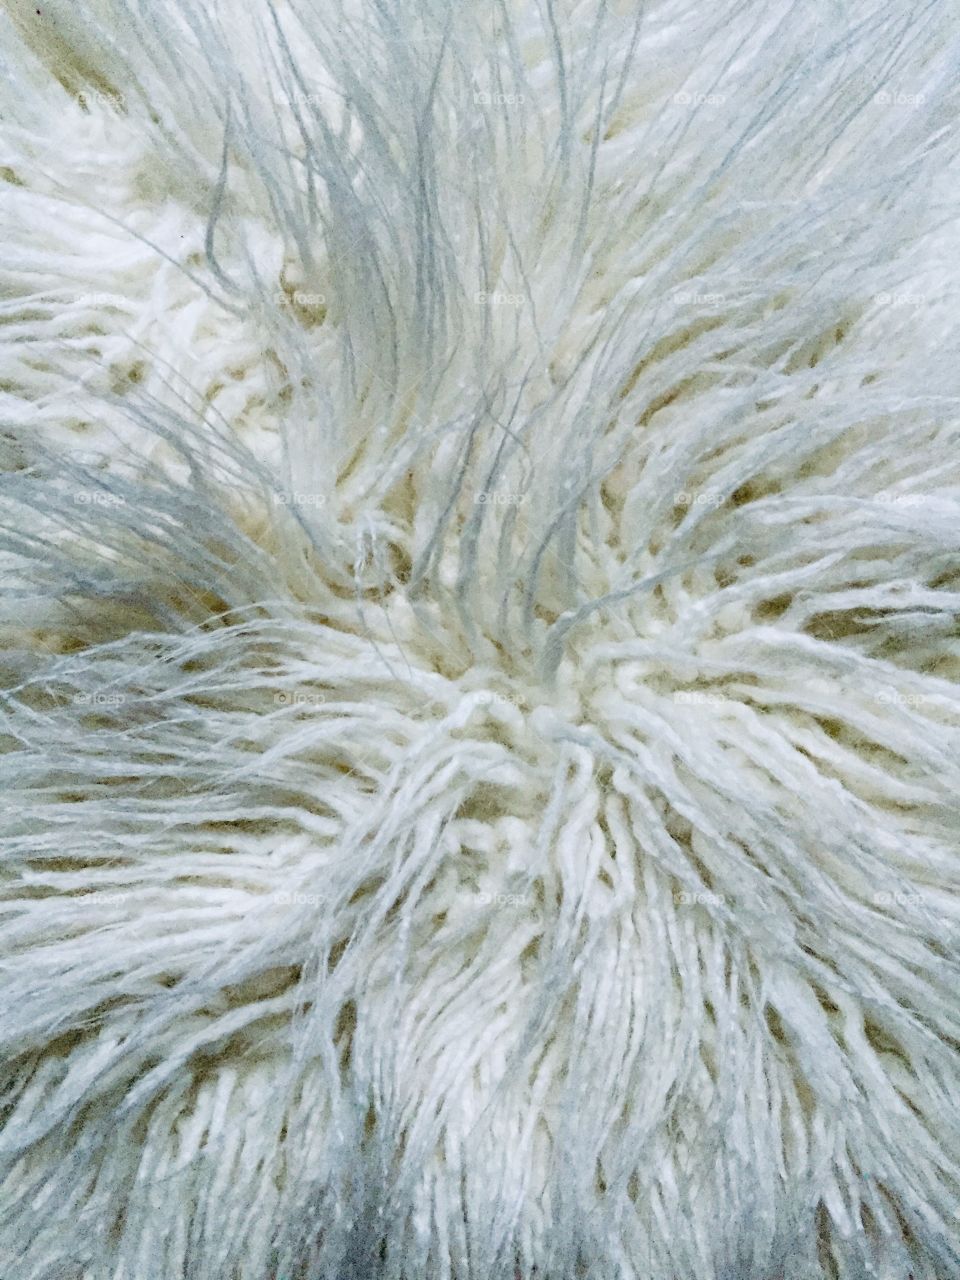 White fur. Fake. Soft and fluffy. A forest of its own. Man made.